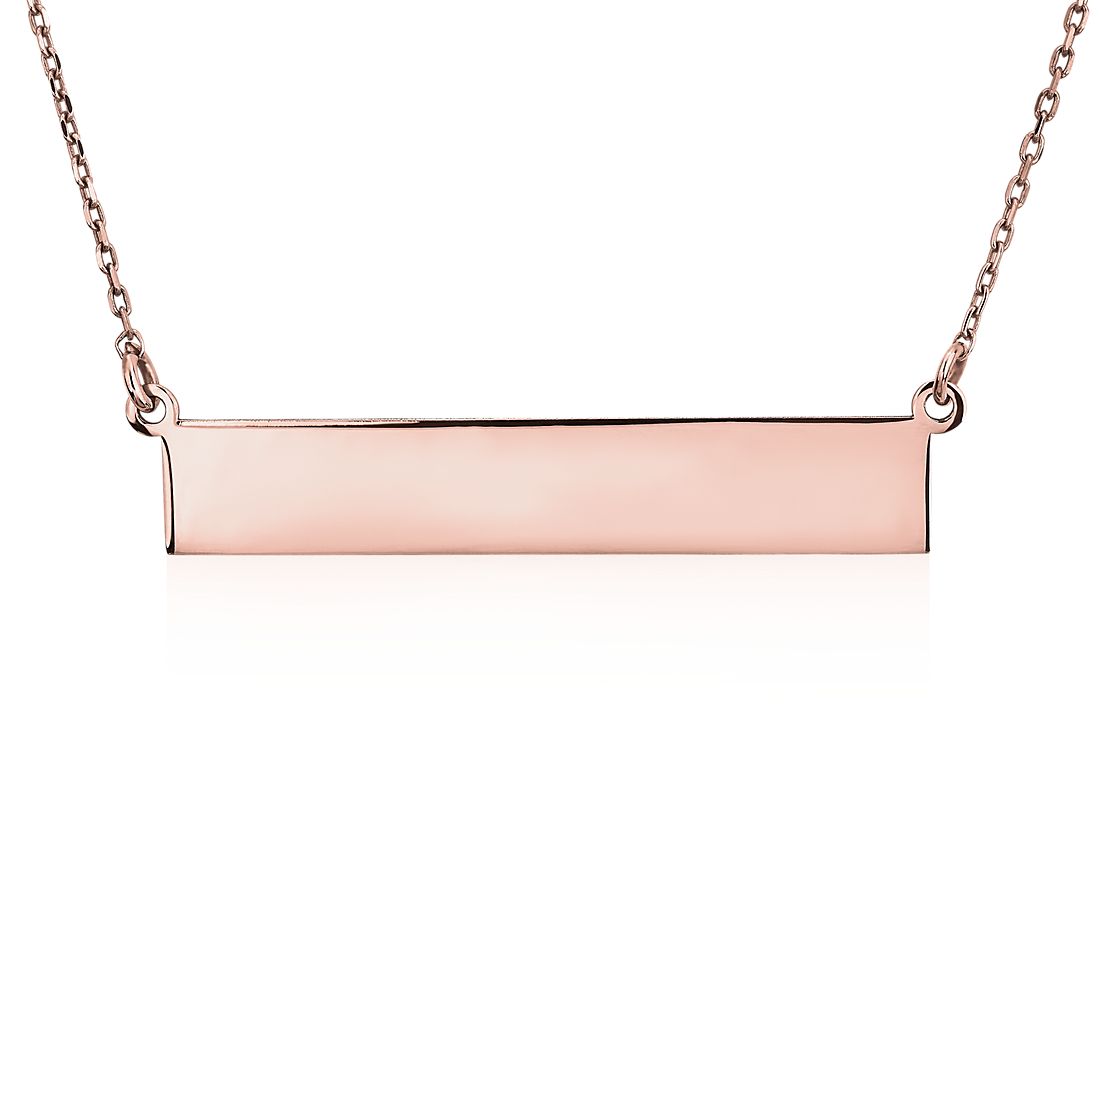 14k rose gold engravable bar necklace set on a fixed chain.